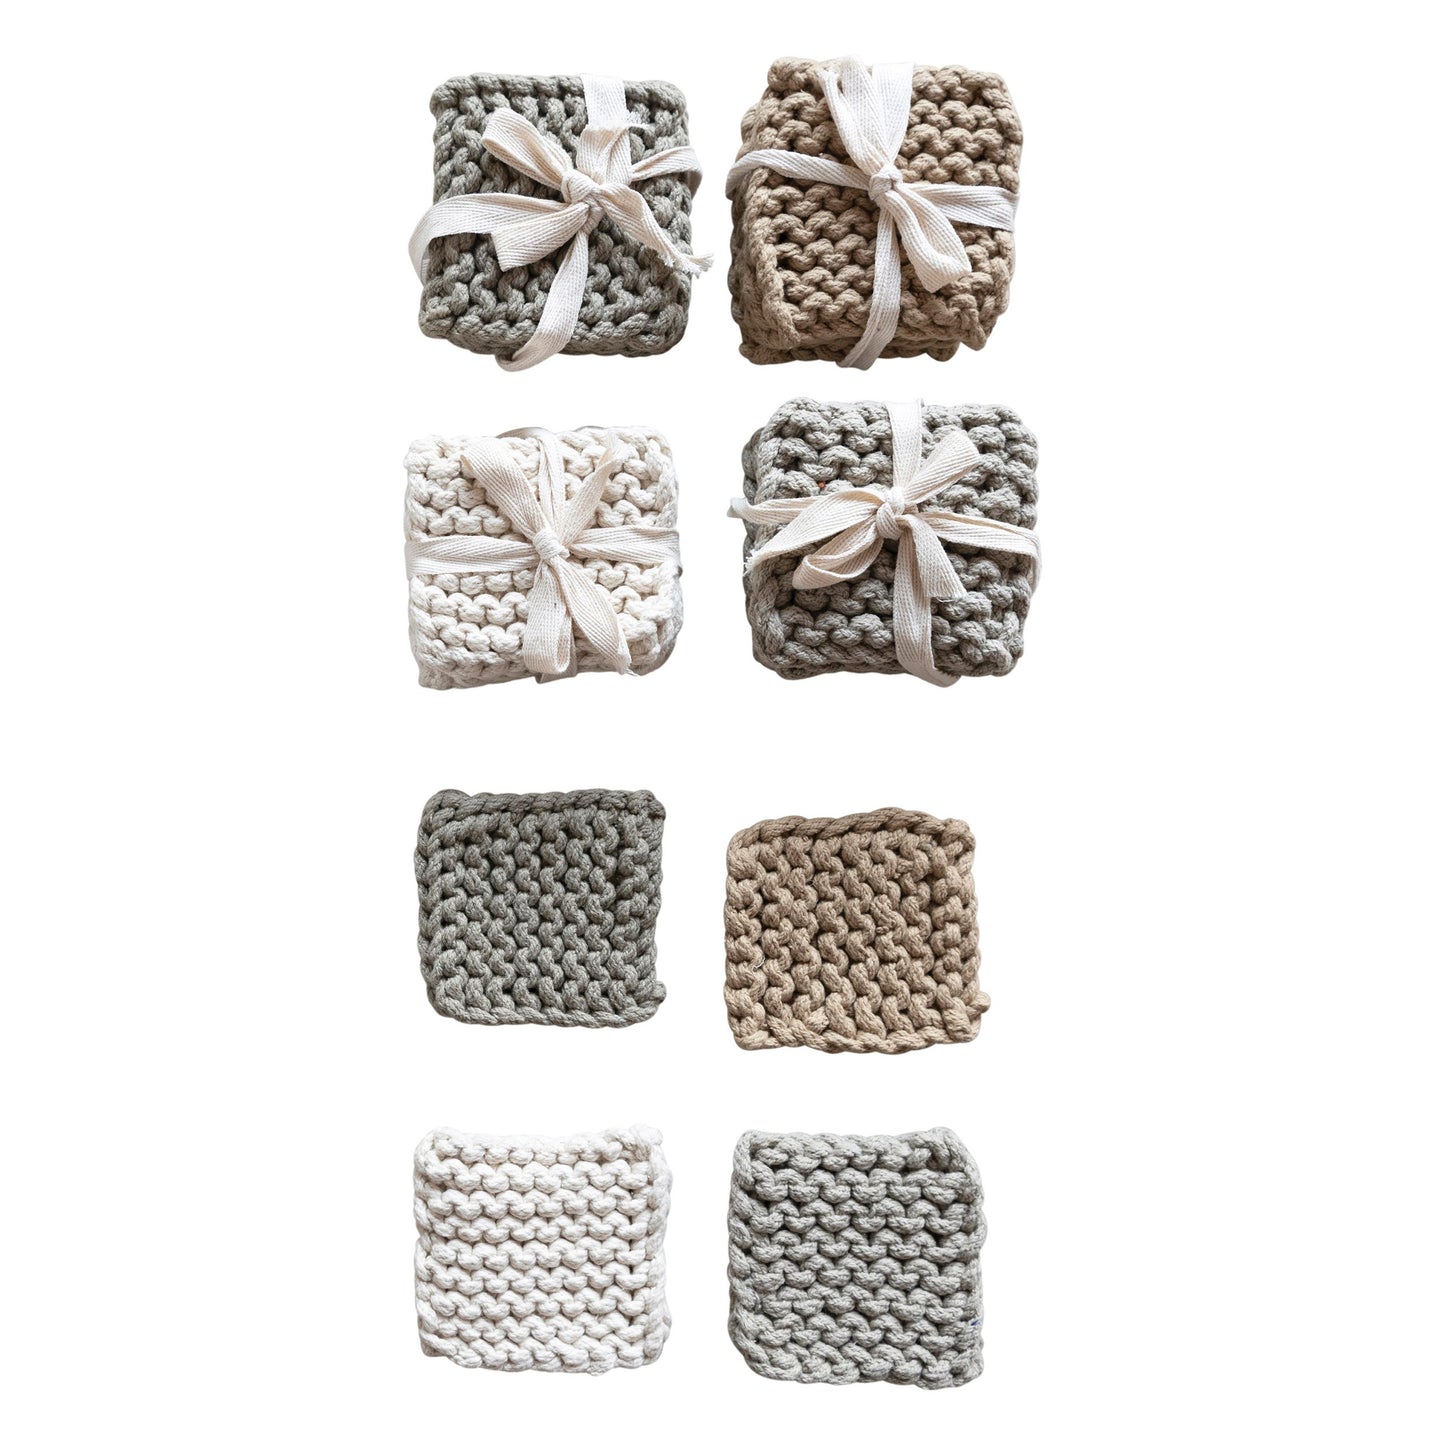 Crocheted Coasters Set of 4